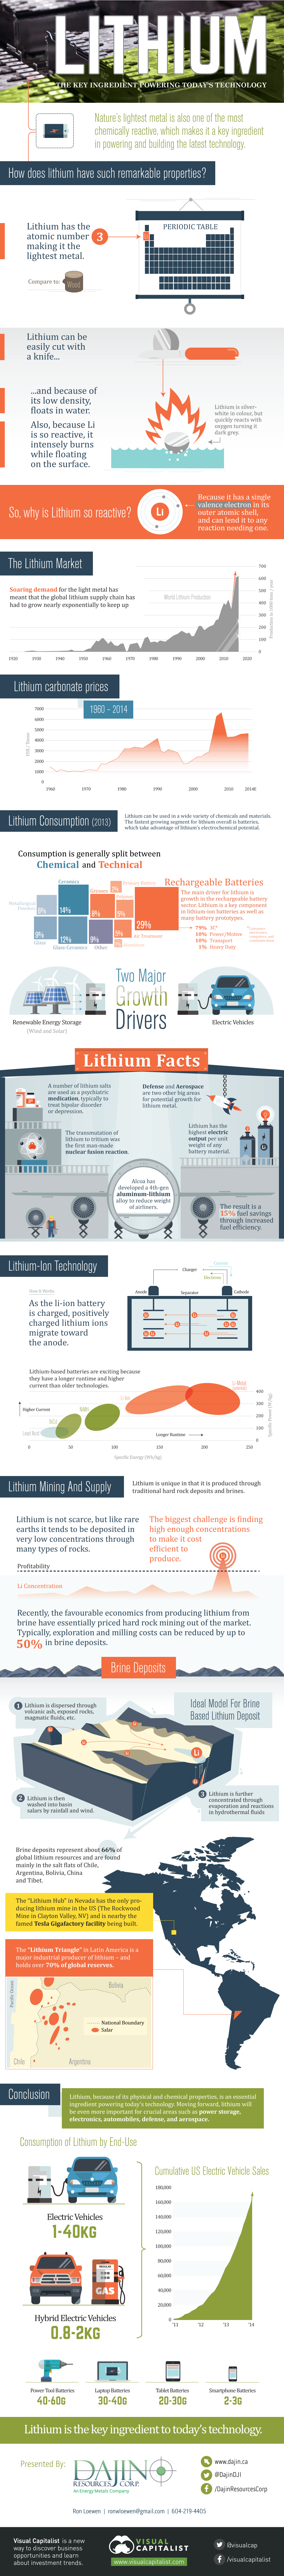 Lithium: The Key Ingredient Powering Today's Technology Infographic